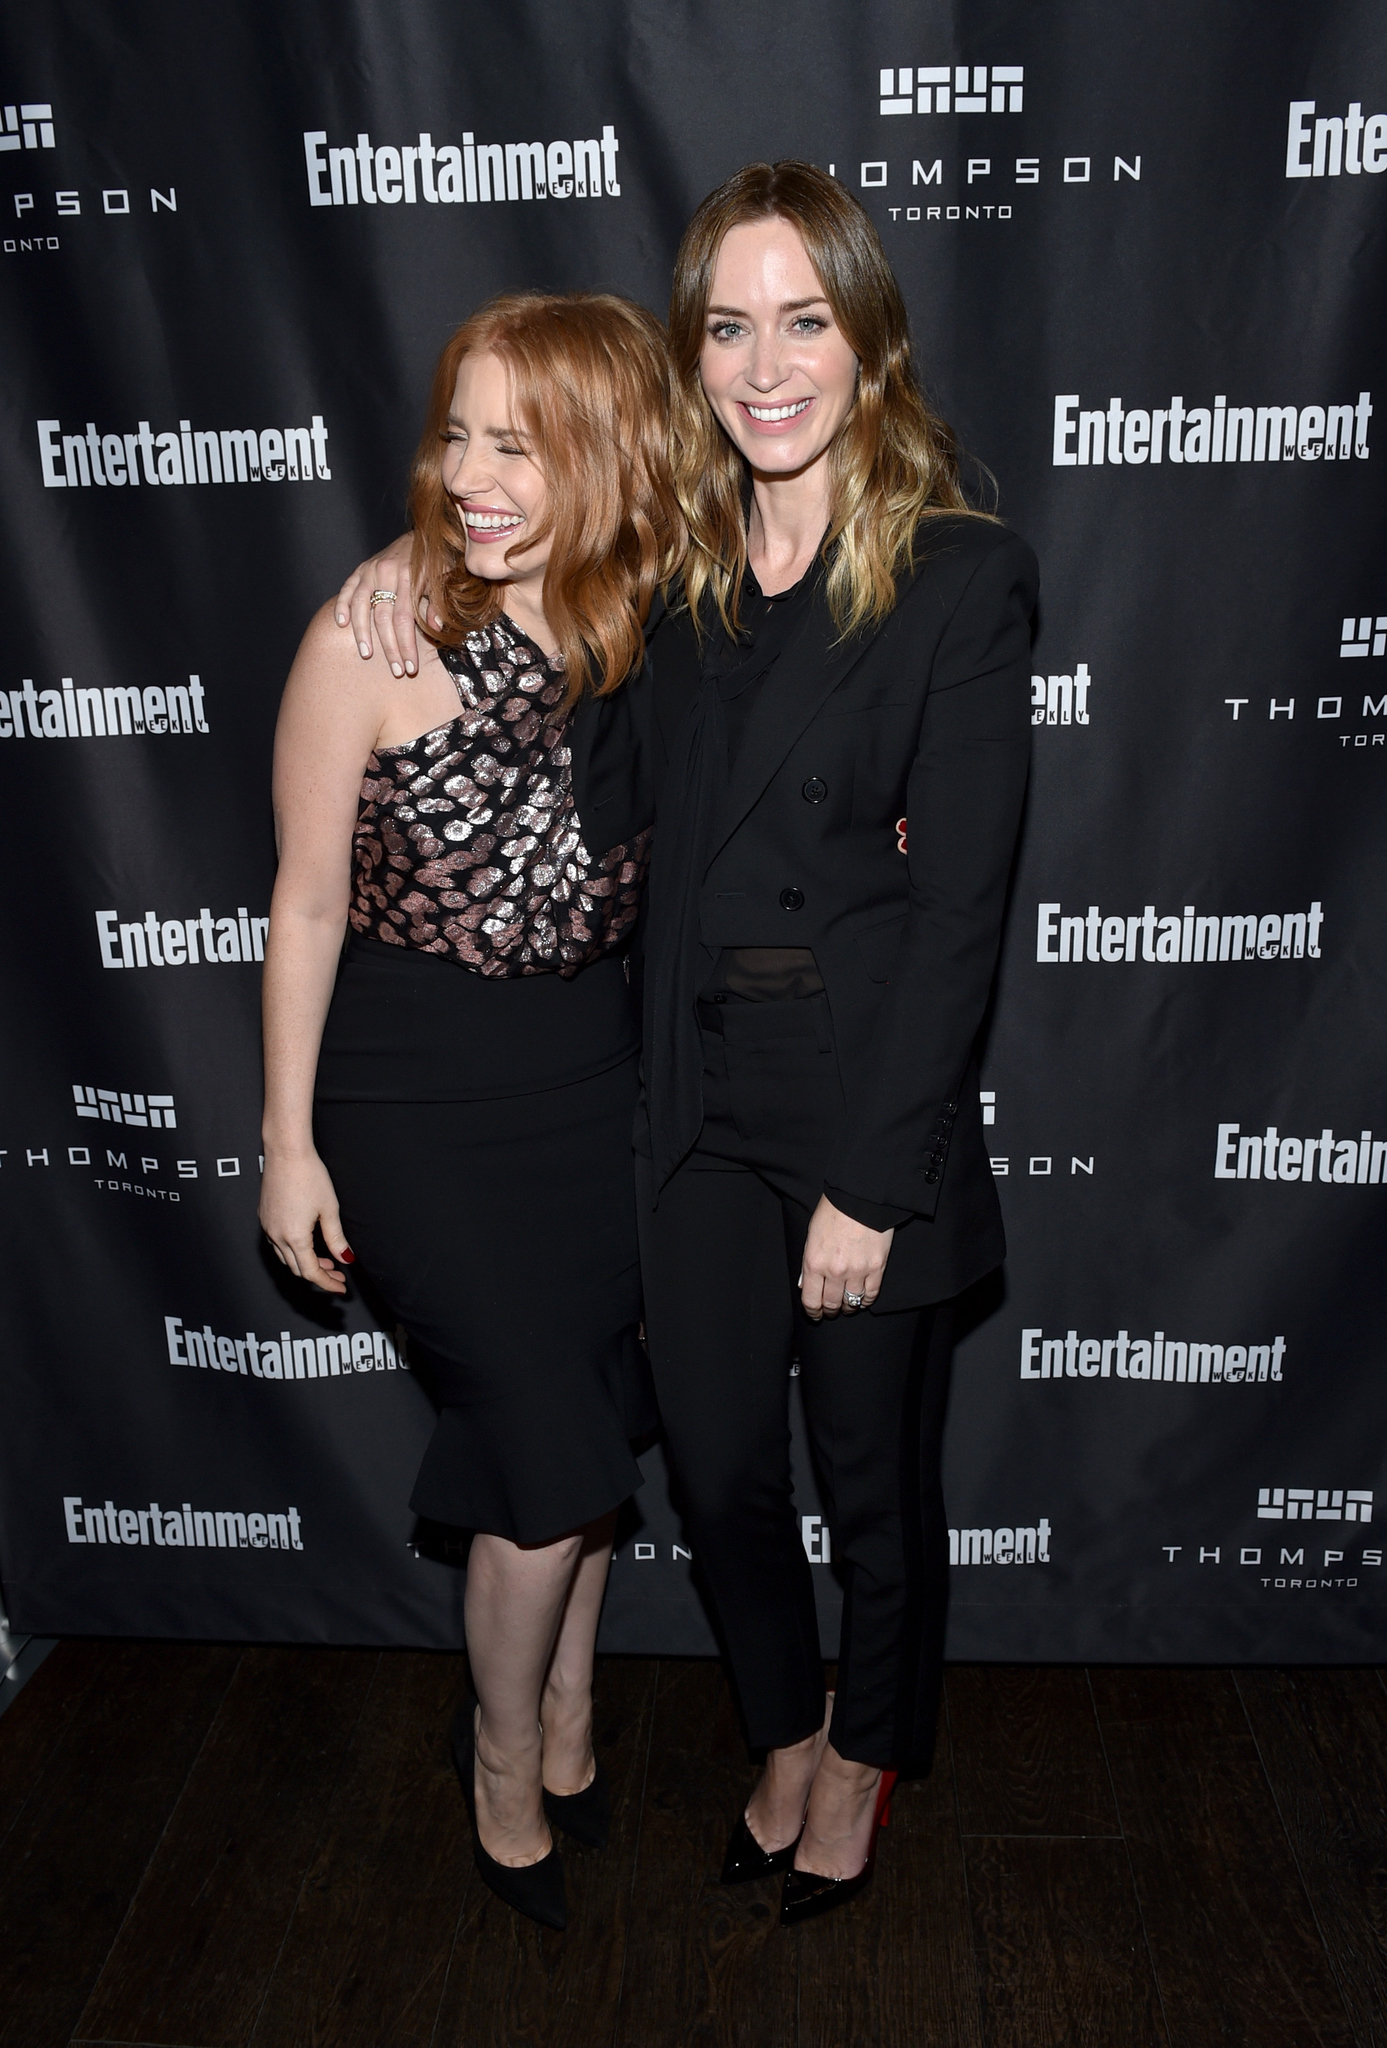 Emily Blunt and Jessica Chastain